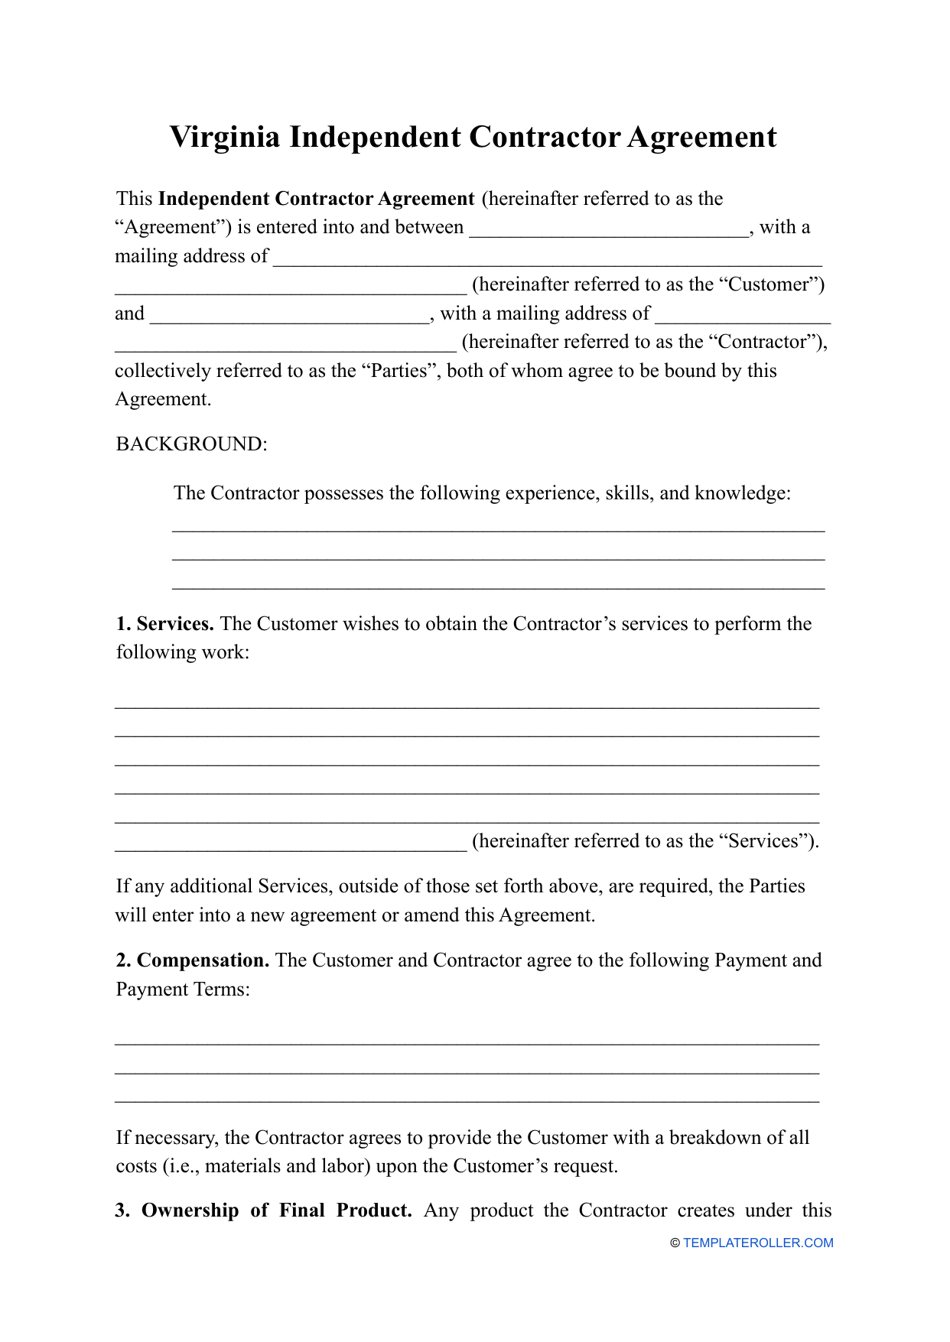 Independent Contractor Agreement Template - Virginia, Page 1